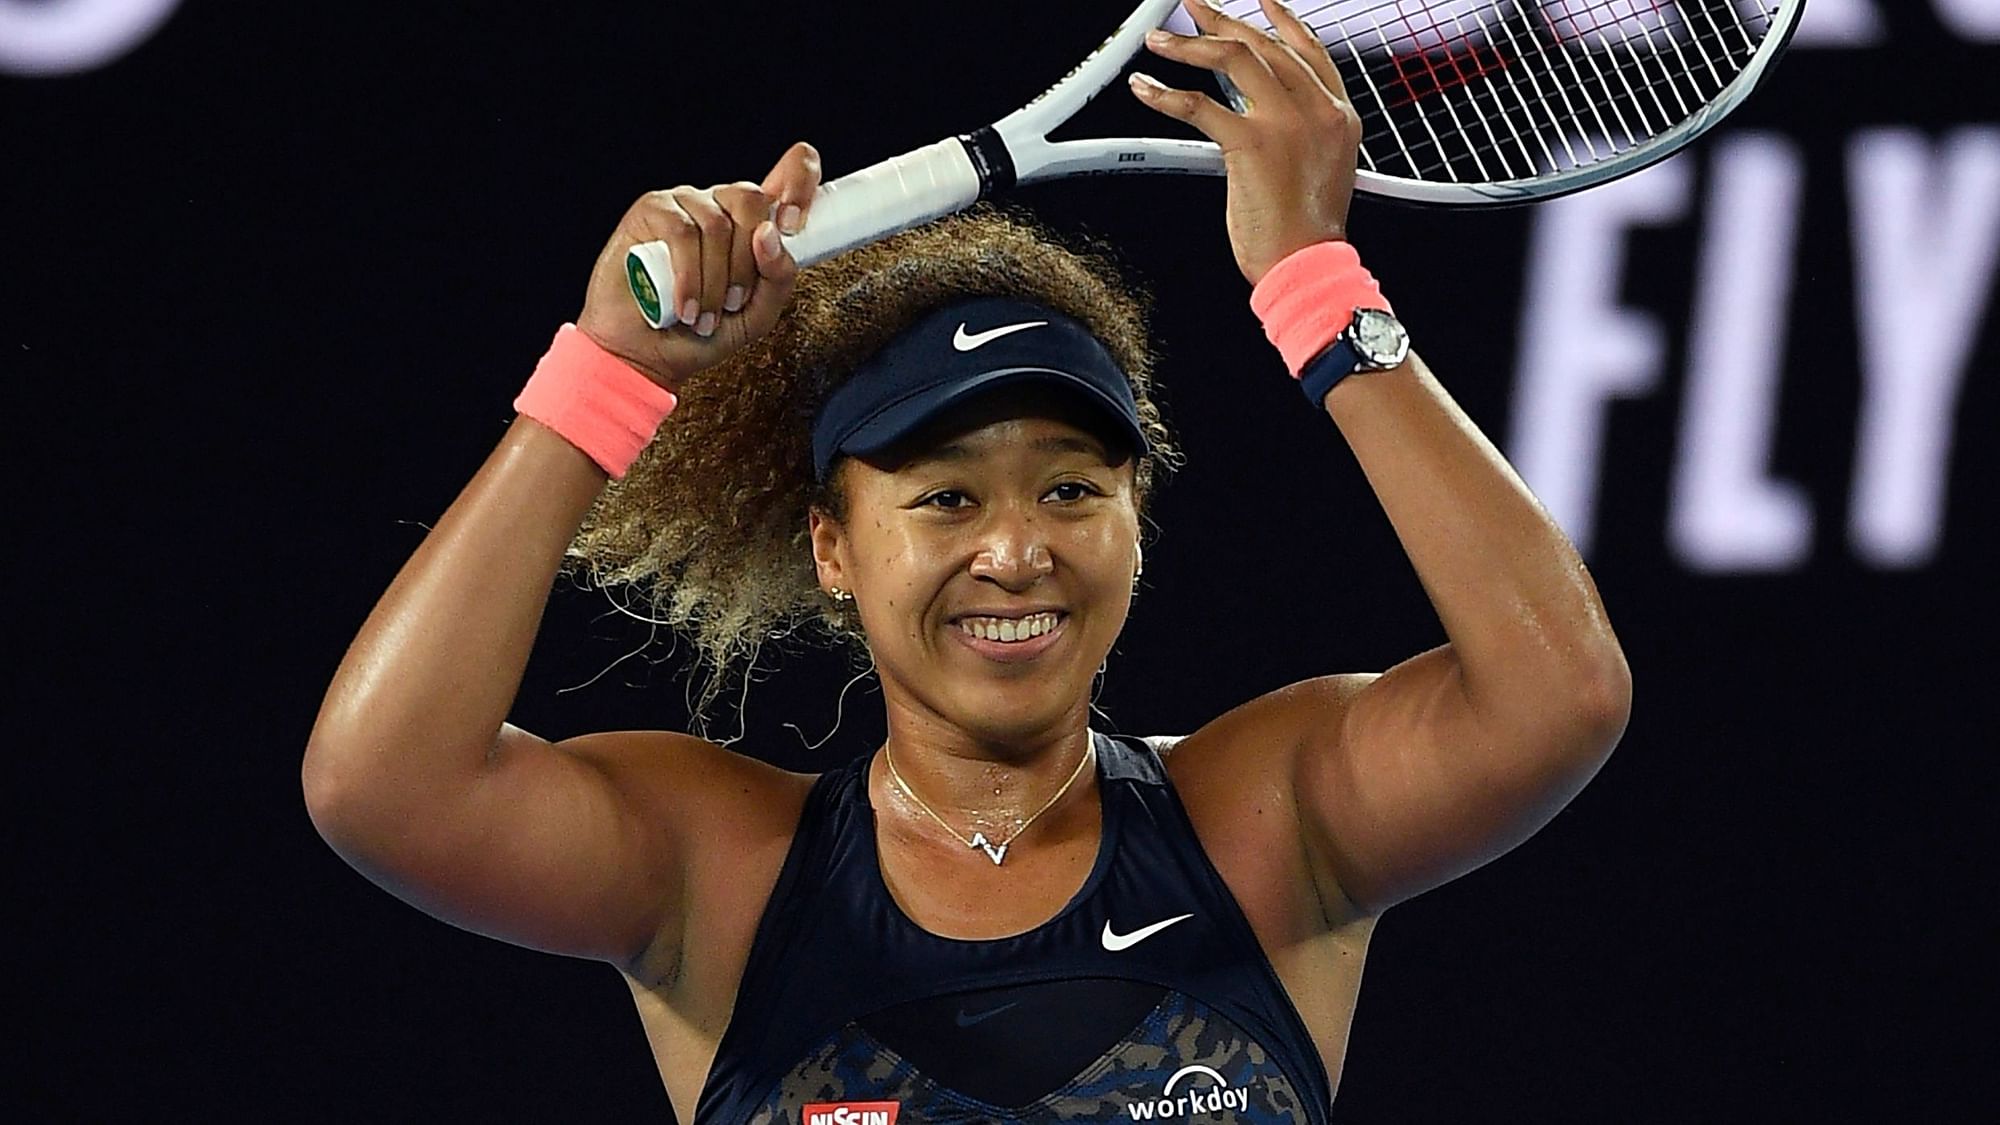 <div class="paragraphs"><p>Osaka has said she hopes the fines she pays for missing the press conferences can be donated towards mental health charity.</p></div><div class="paragraphs"><p><br></p></div>